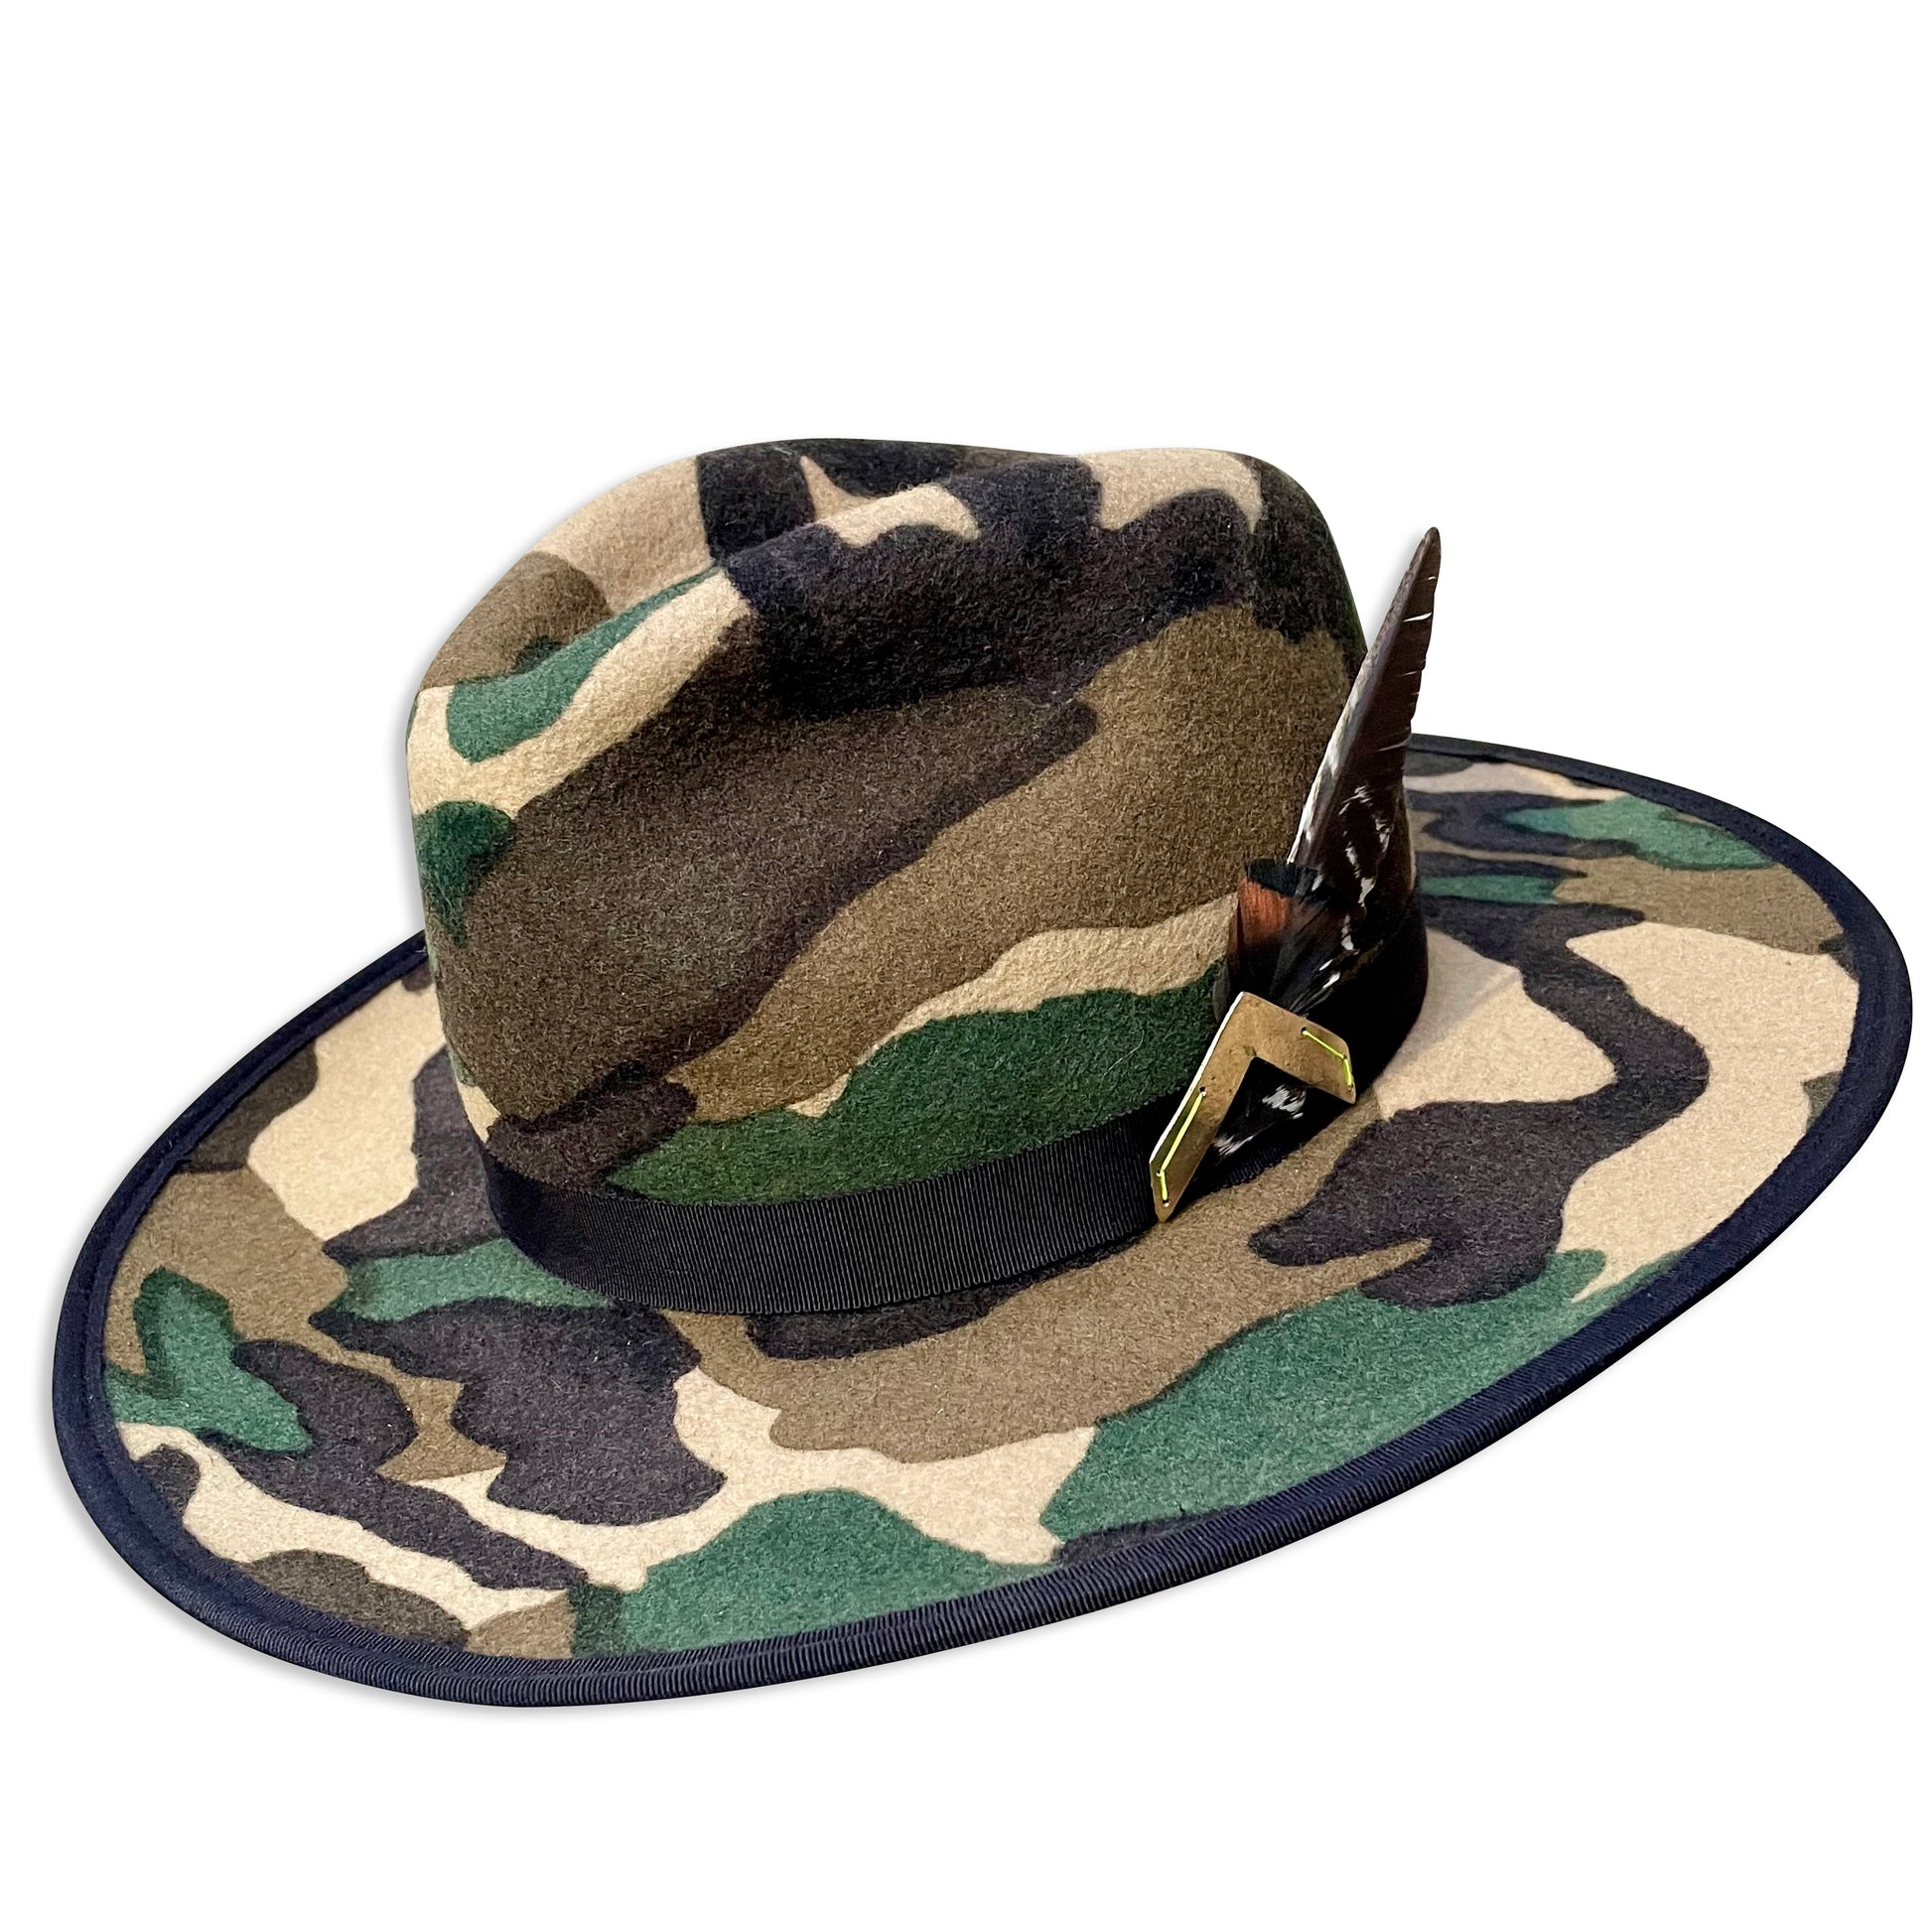 Camo Cowboy Hat from Cha Cha's House of Ill Repute, a NYC hat shop